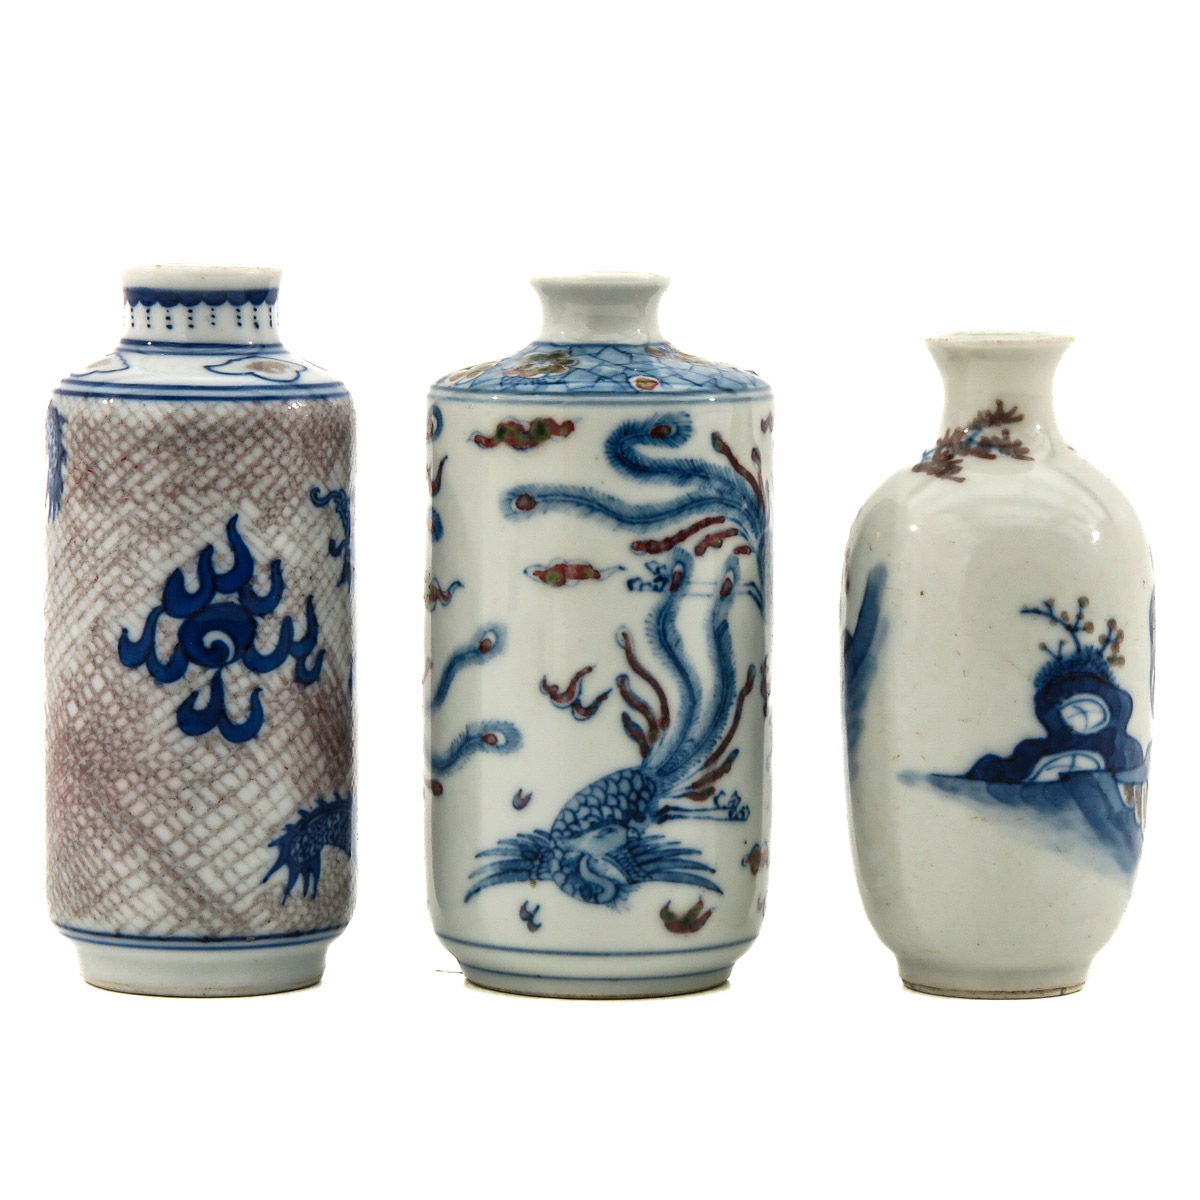 A Collection of 3 Snuff Bottles - Image 4 of 10